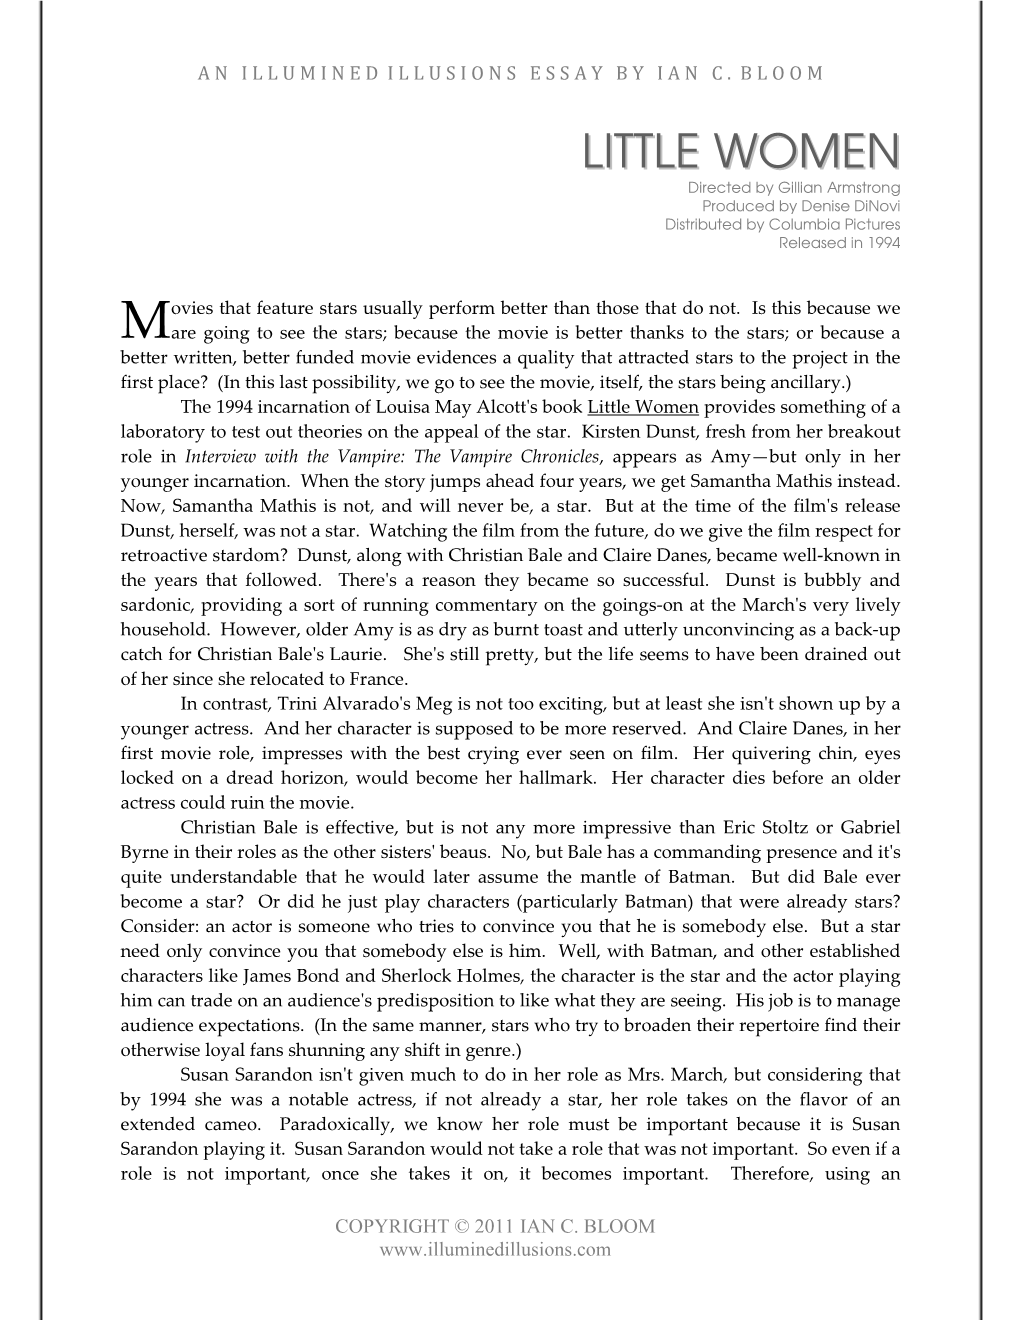 Little Women Provides Something of a Laboratory to Test out Theories on the Appeal of the Star